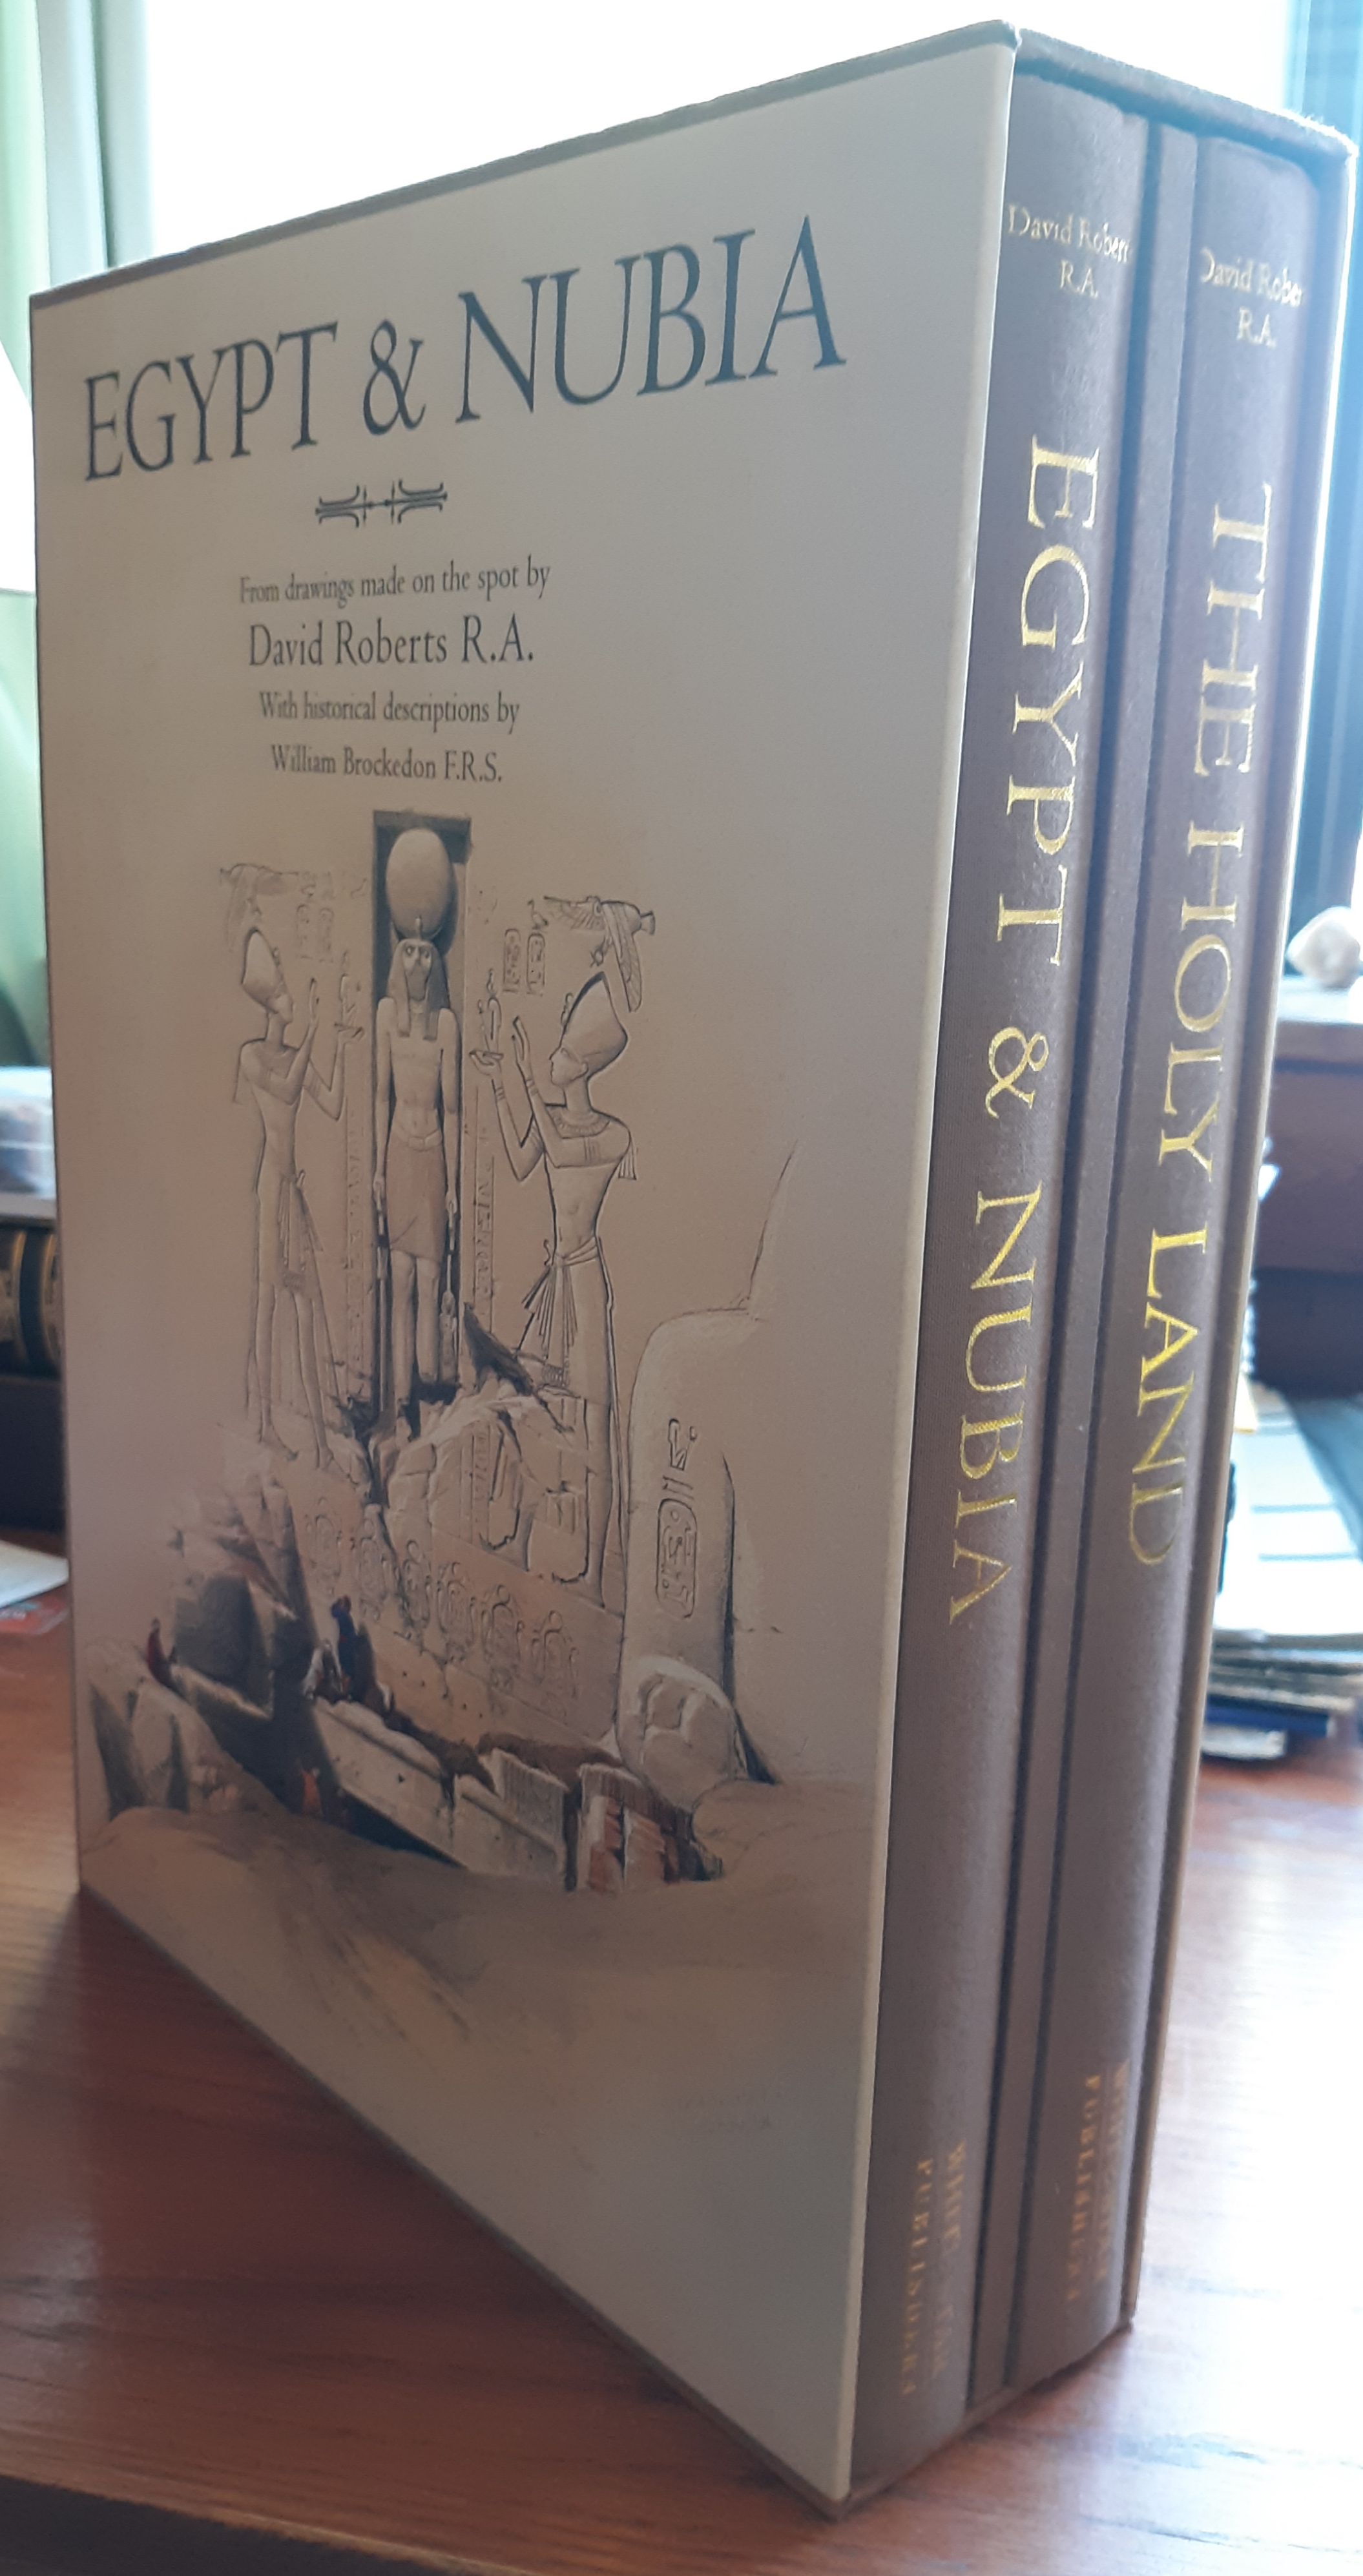 The Life, Works, and Travels of David Roberts R.A., Egypt & Nubia, The Holy Land (3 volume set in slipcase) From drawings made on the spot by David Roberts R.A. - David Roberts (artist), William Brockedon and George Croly (historical descriptions), Fabio Bourbon (text), Anna Galliani (graphic design)